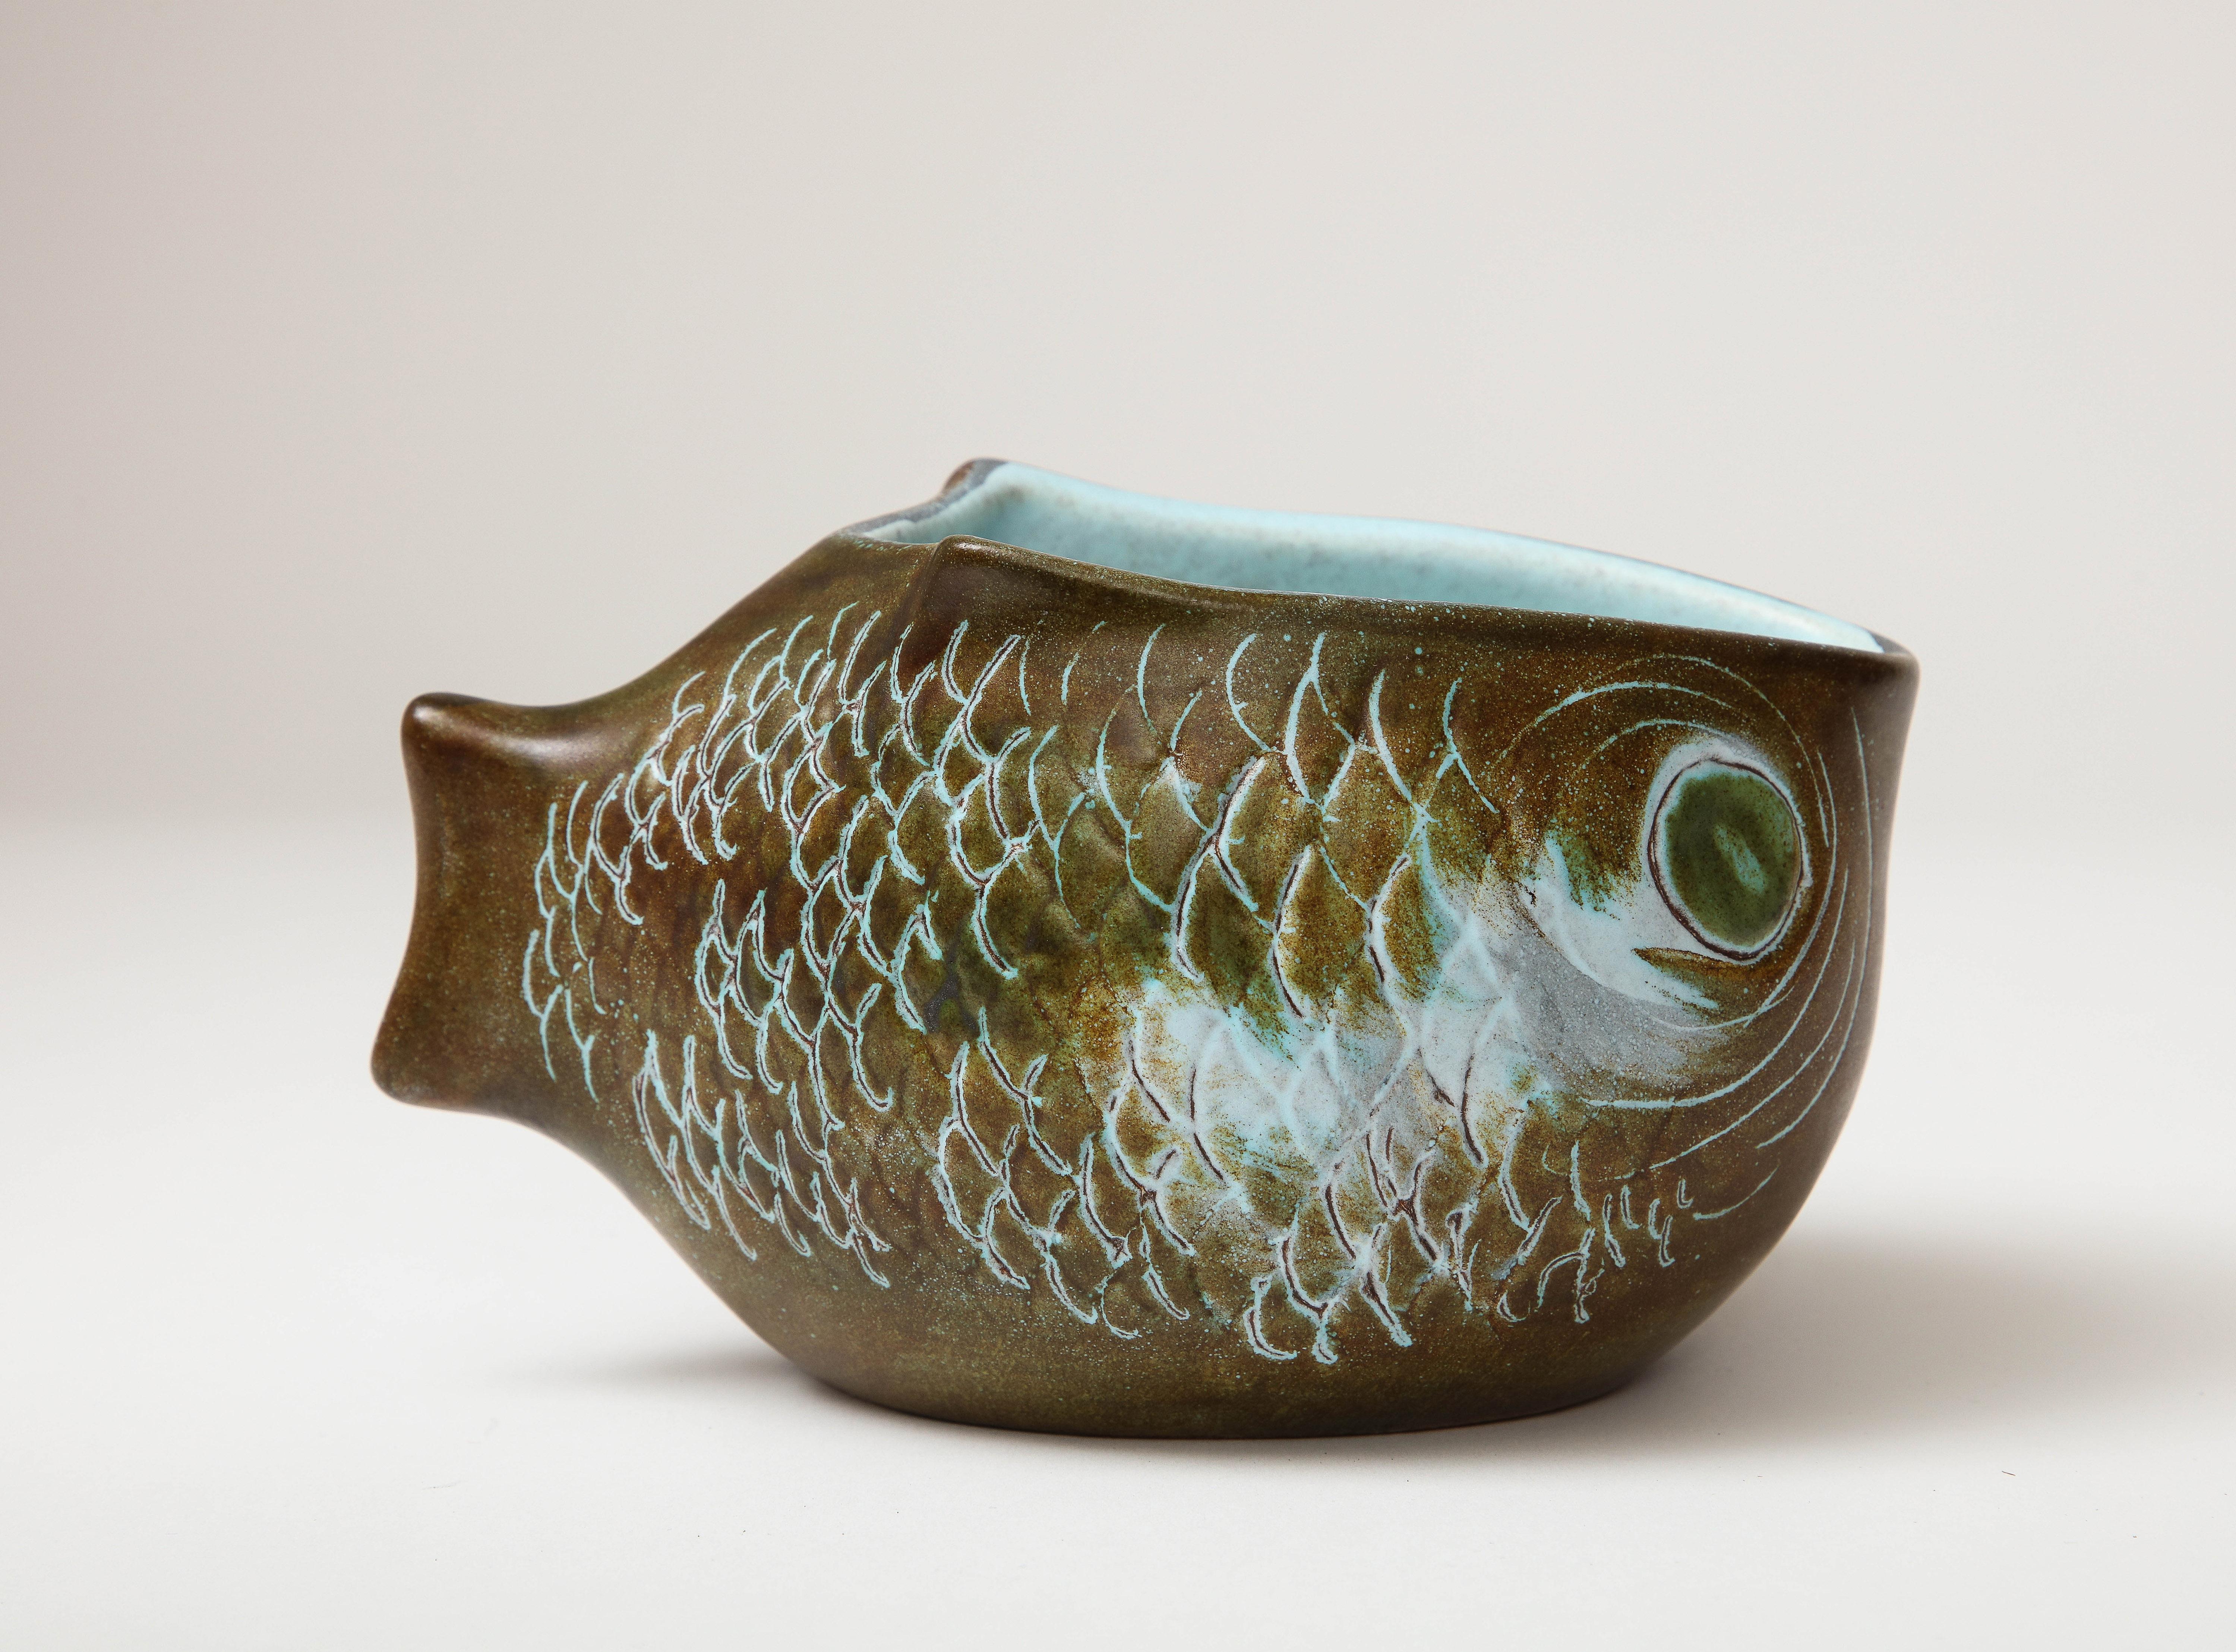 Glazed Ceramic Bowl in the Shape of a Fish, Guillot, c. 1960 In Excellent Condition For Sale In New York City, NY